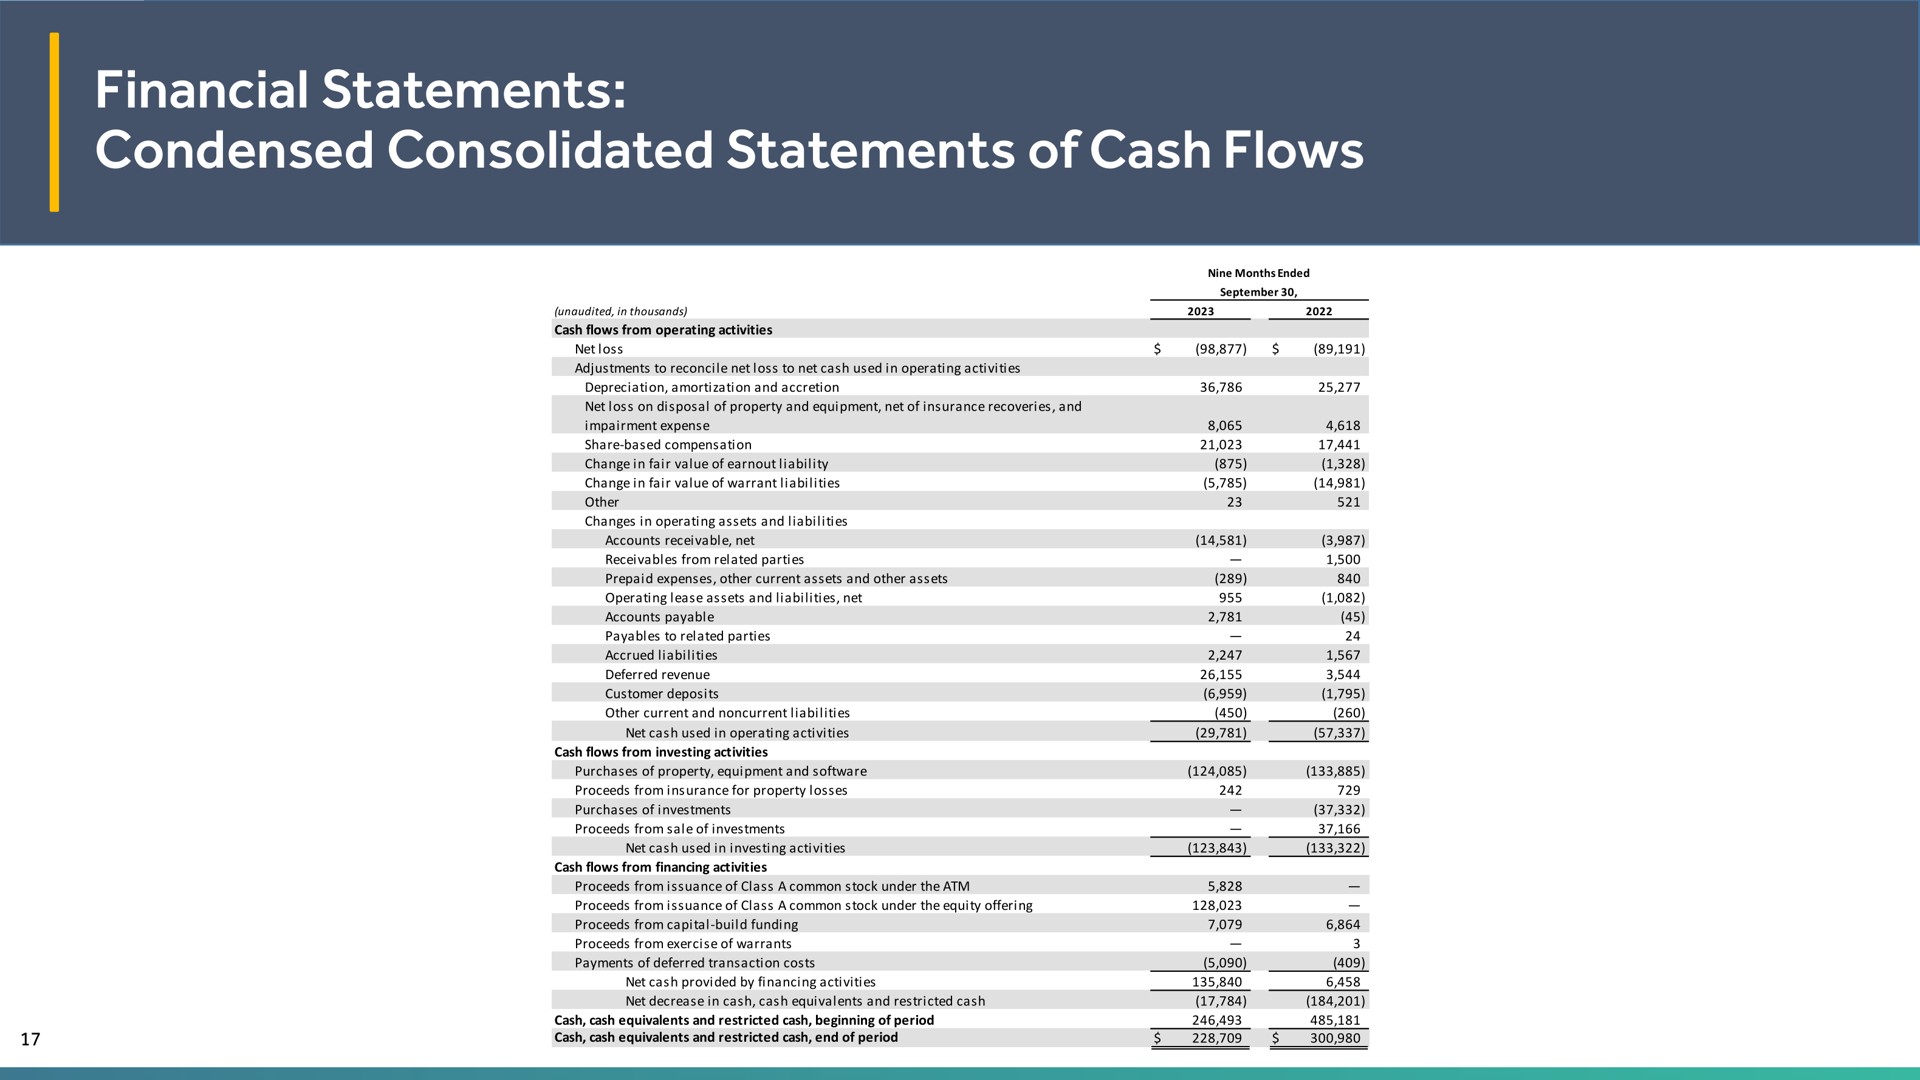 financial statements condensed consolidated statements of cash flows | EVgo